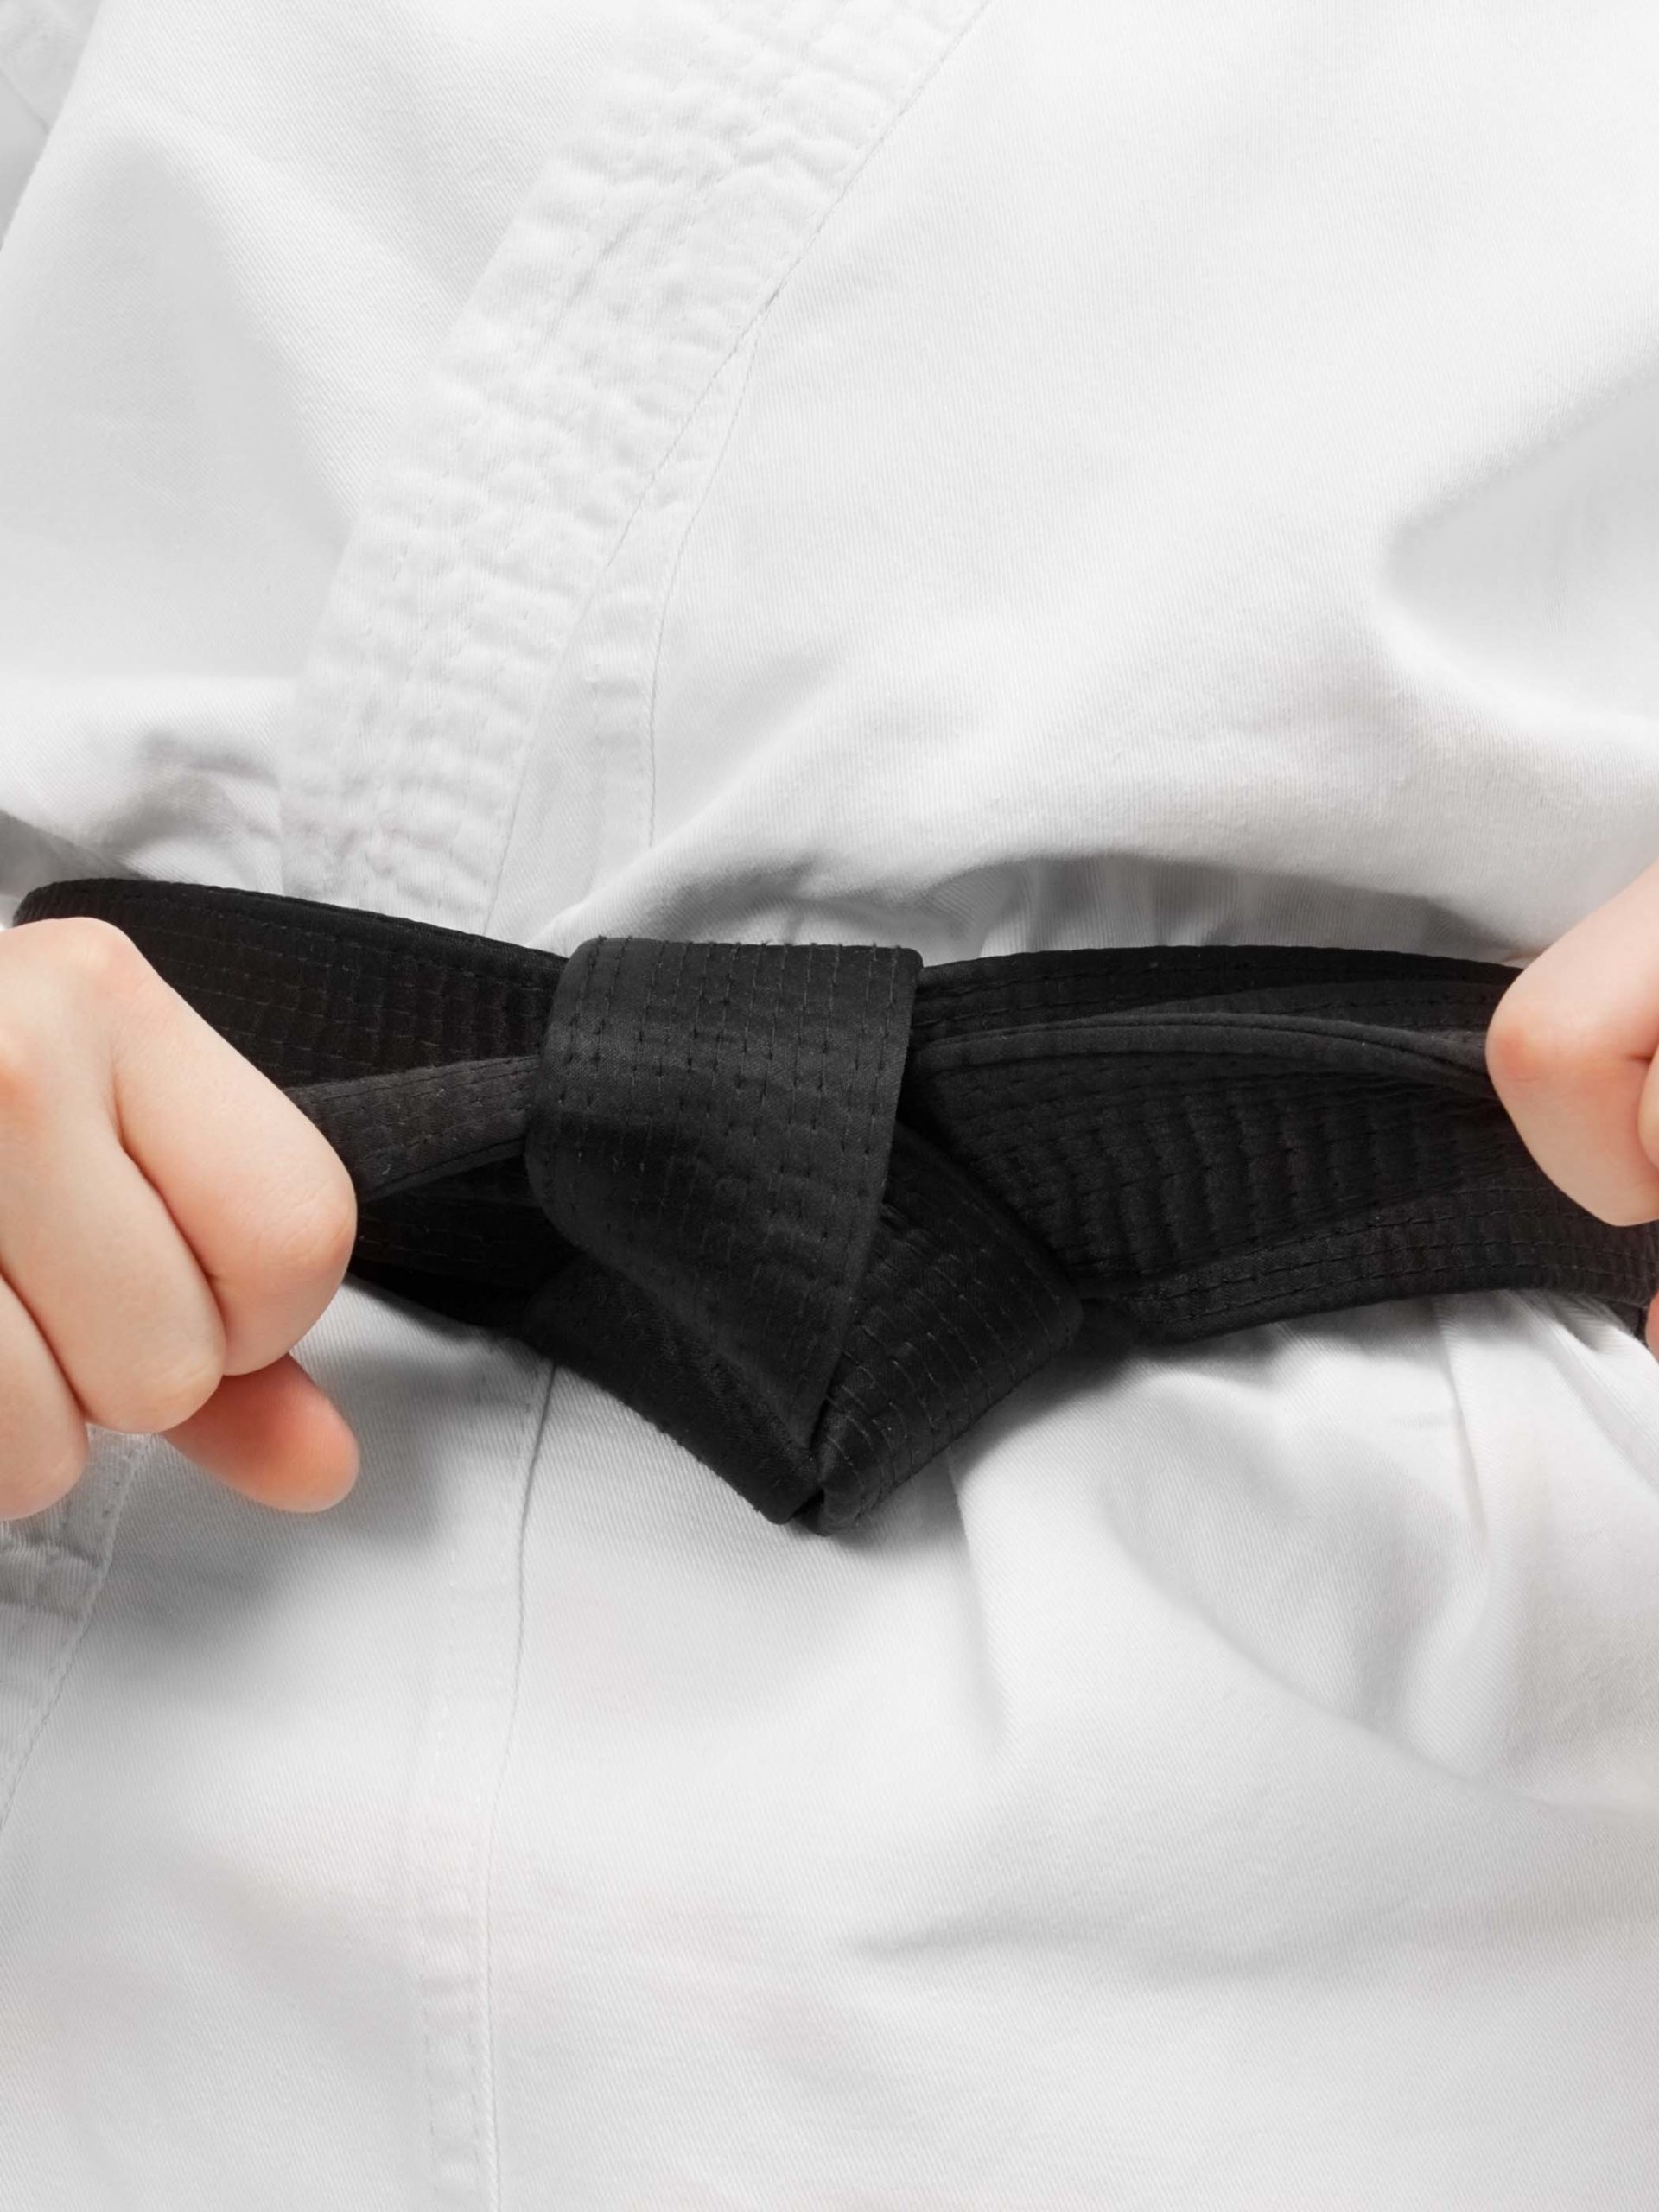 Martial arts boy tying the knot to his black belt